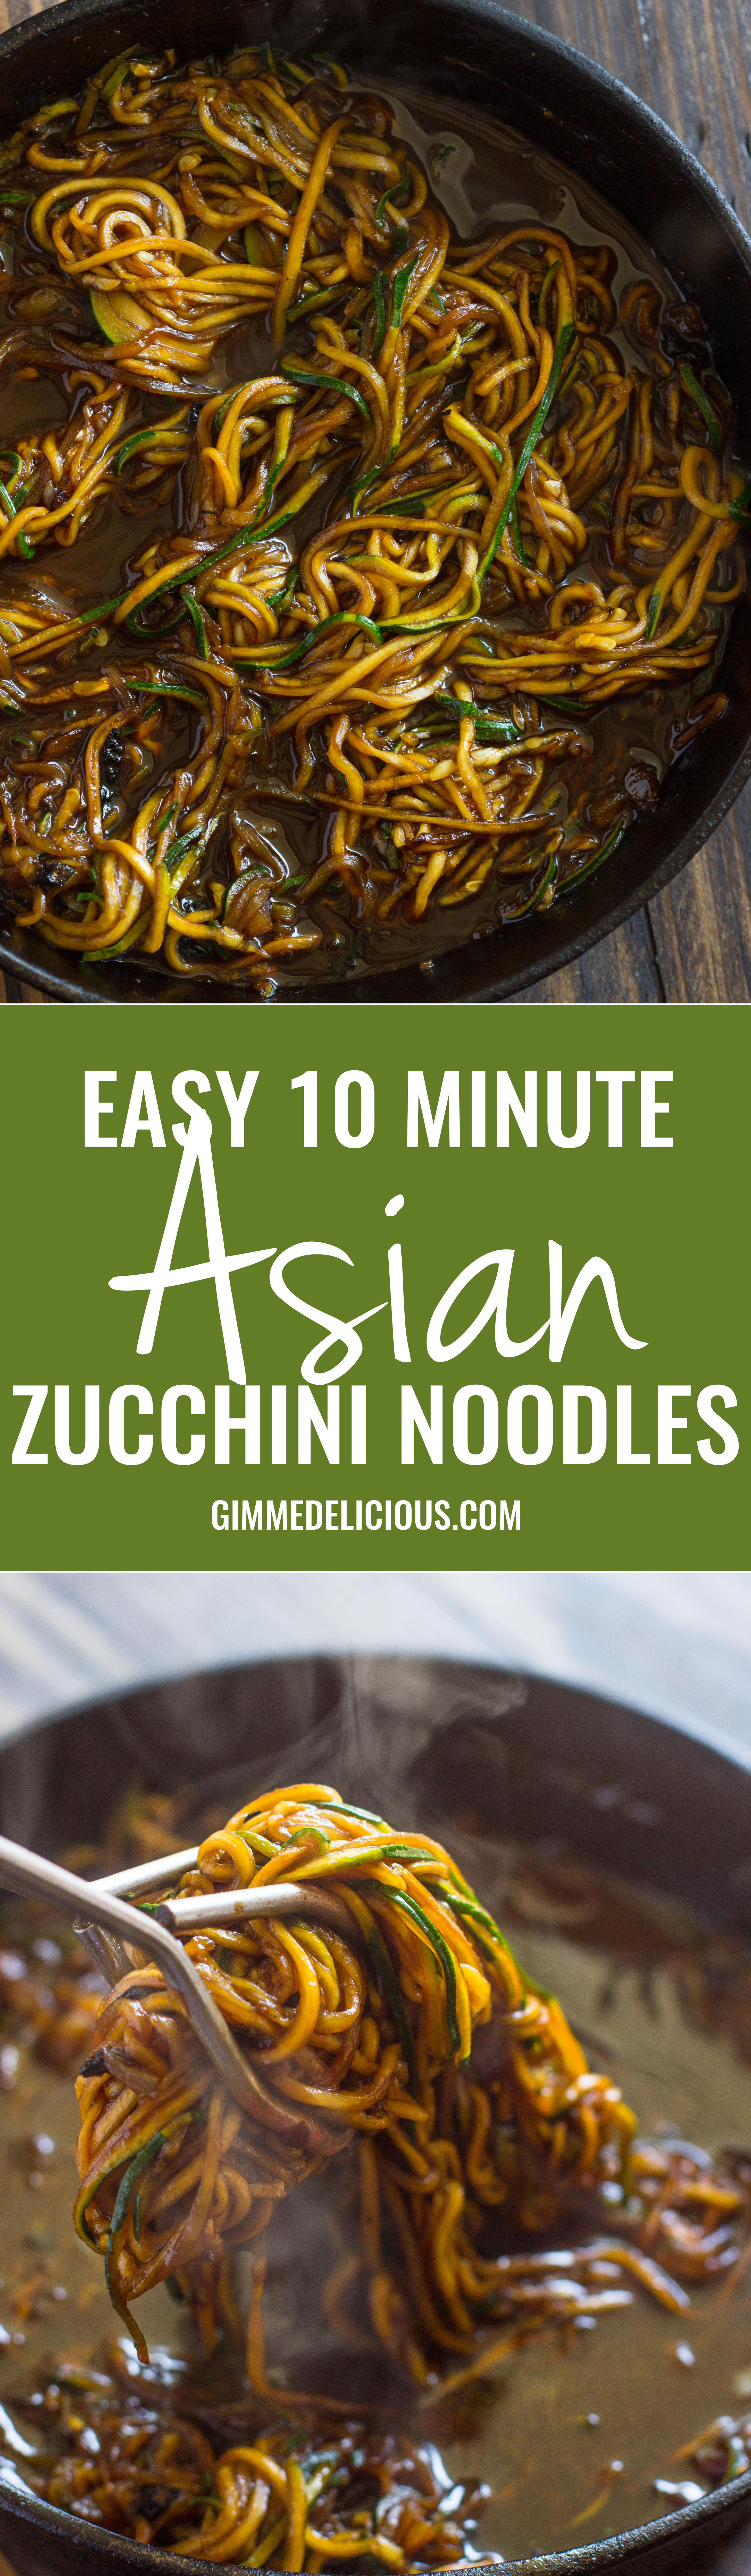 Easy 10 Minute Asian Zucchini Noodles (low-carb, Paleo)